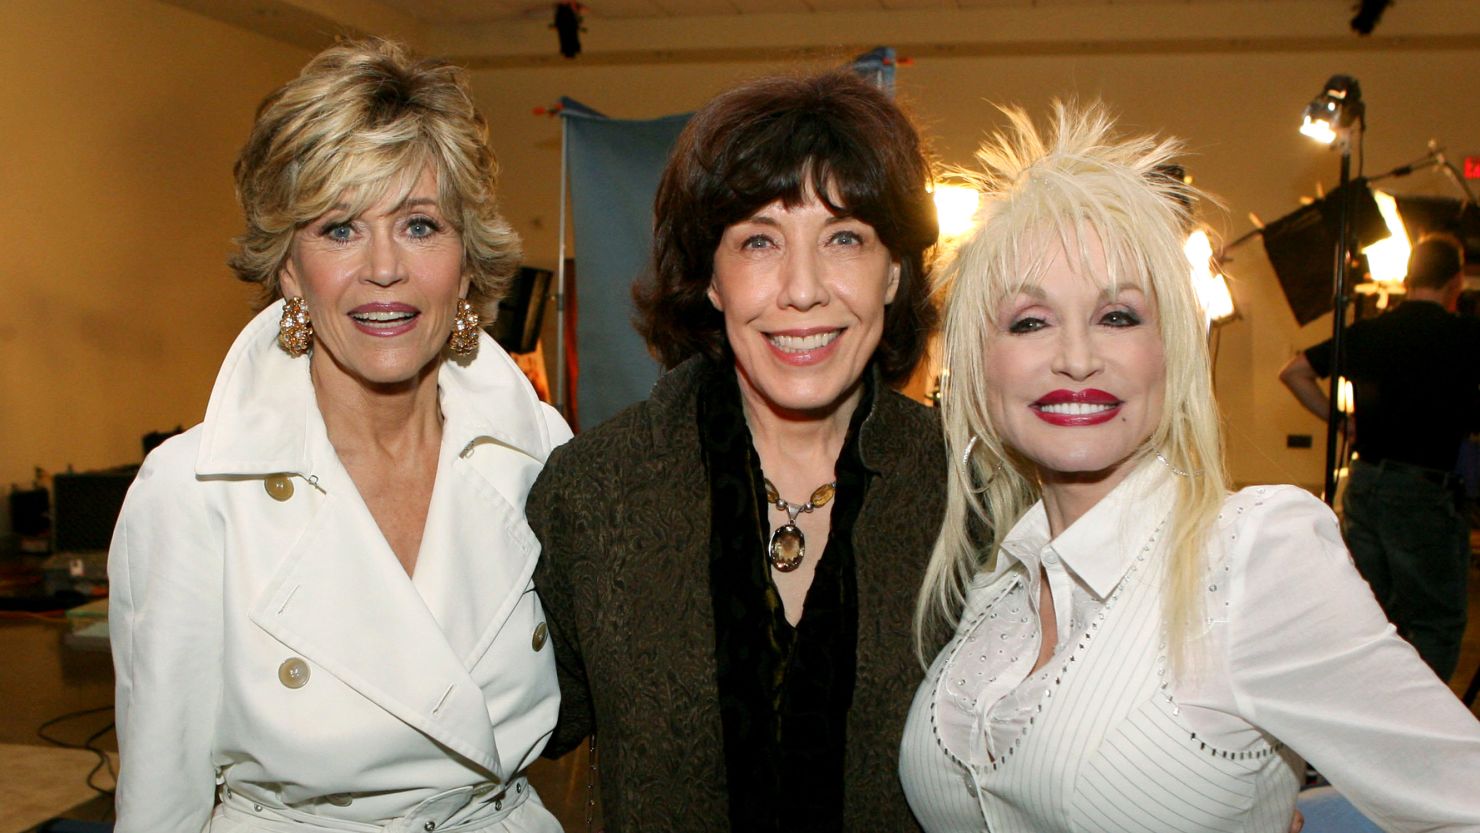 Jane Fonda, Lily Tomlin and Dolly Parton, from left to right, will reunite at the SAG Awards January 29, 2017.